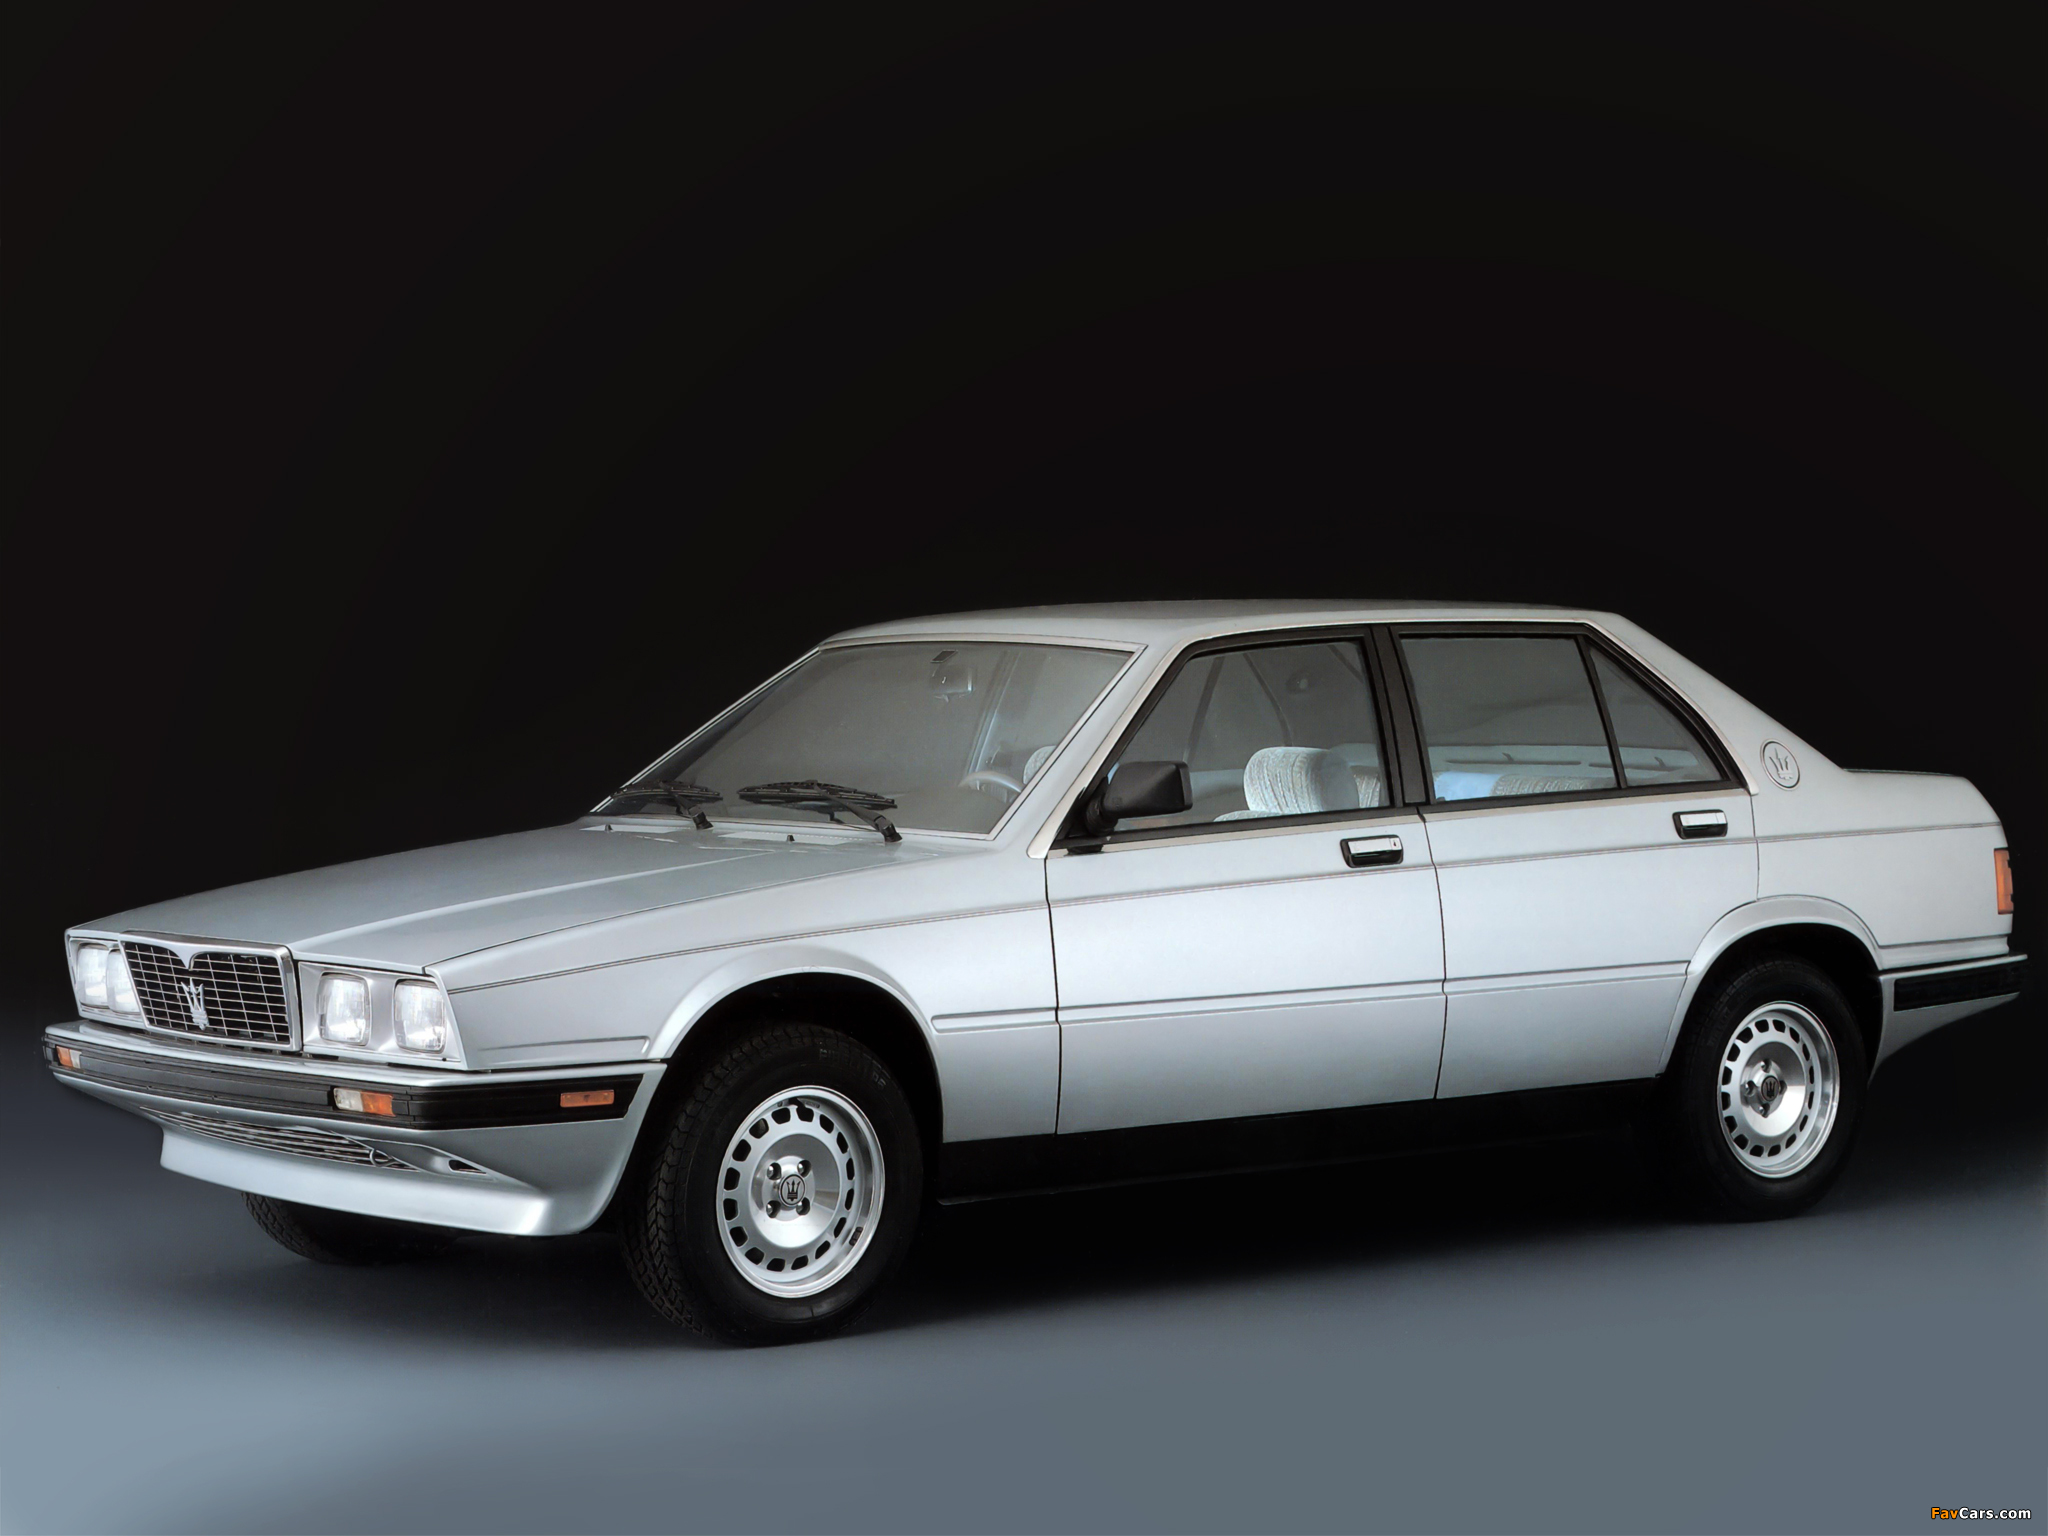 Maserati 425 technical details, history, photos on Better ...